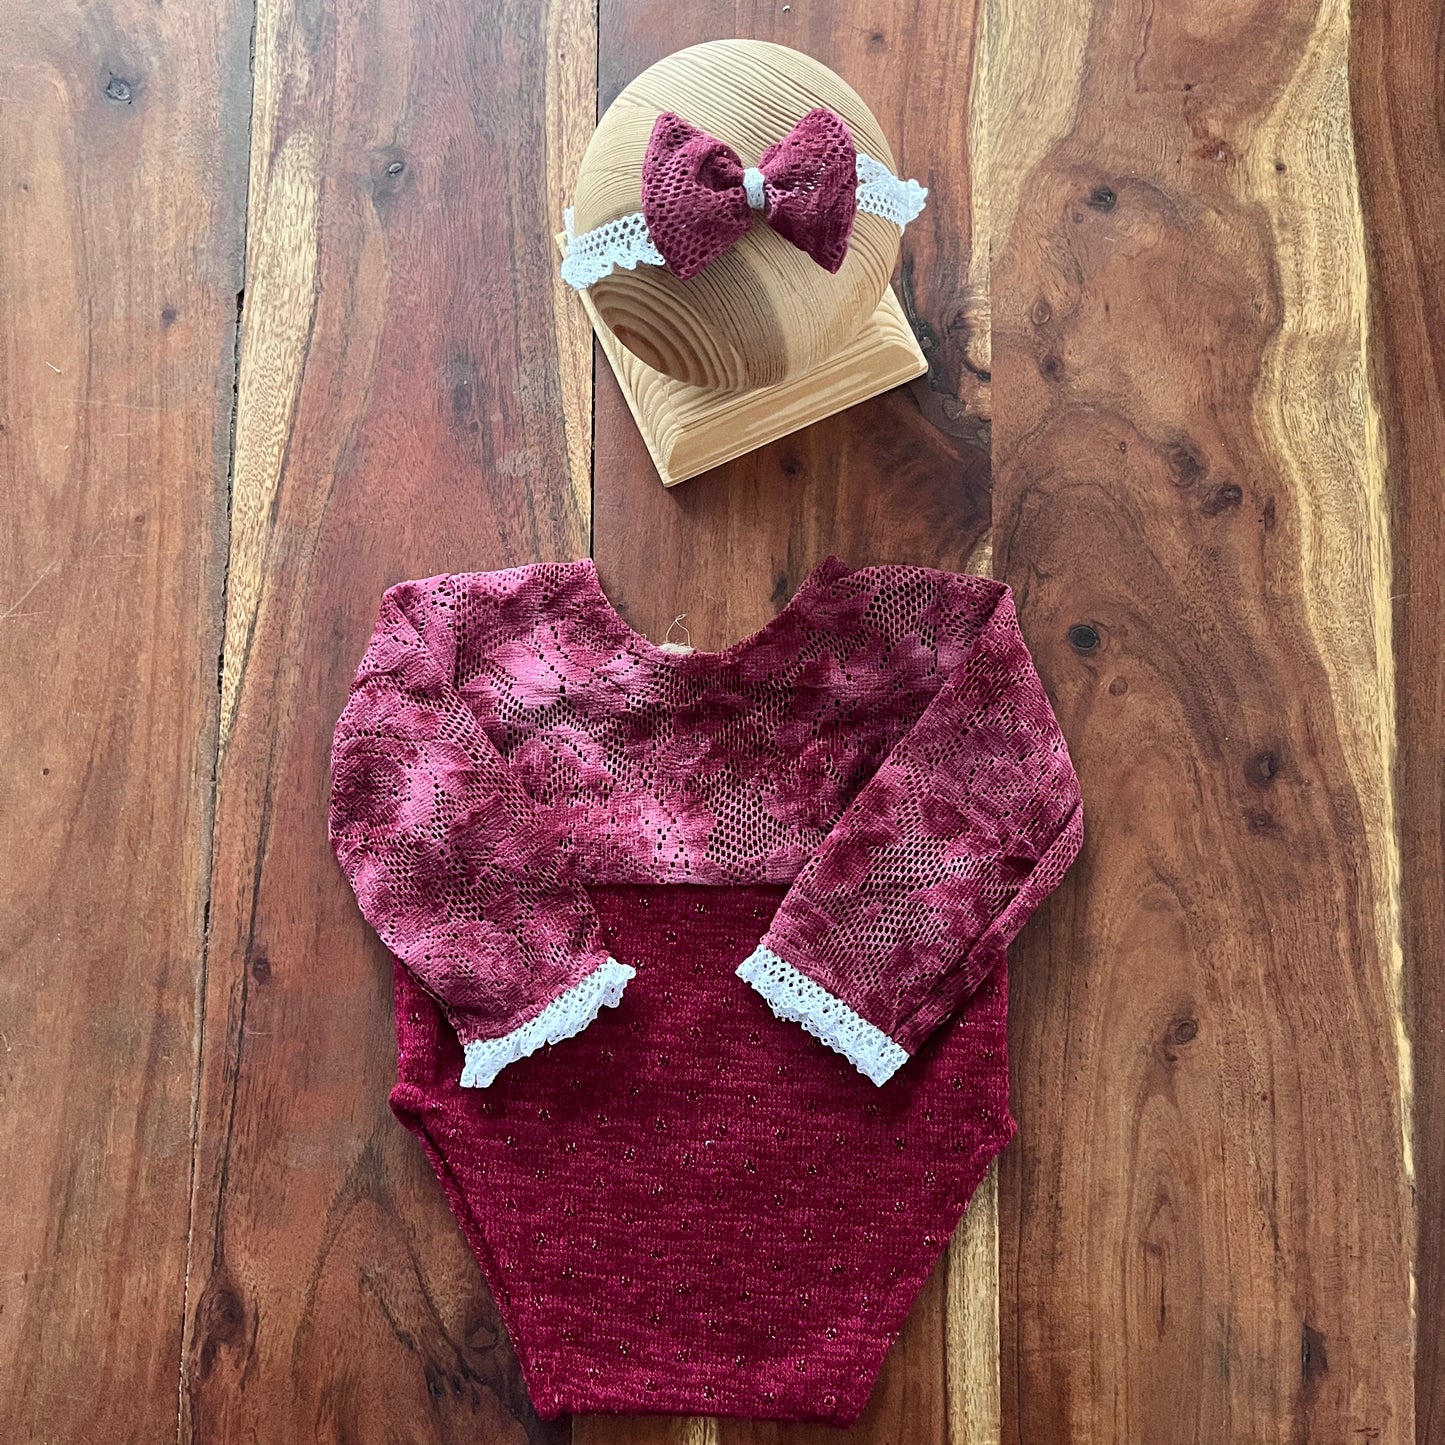 Anne wine Newborn Photography Prop Outfit For Girl